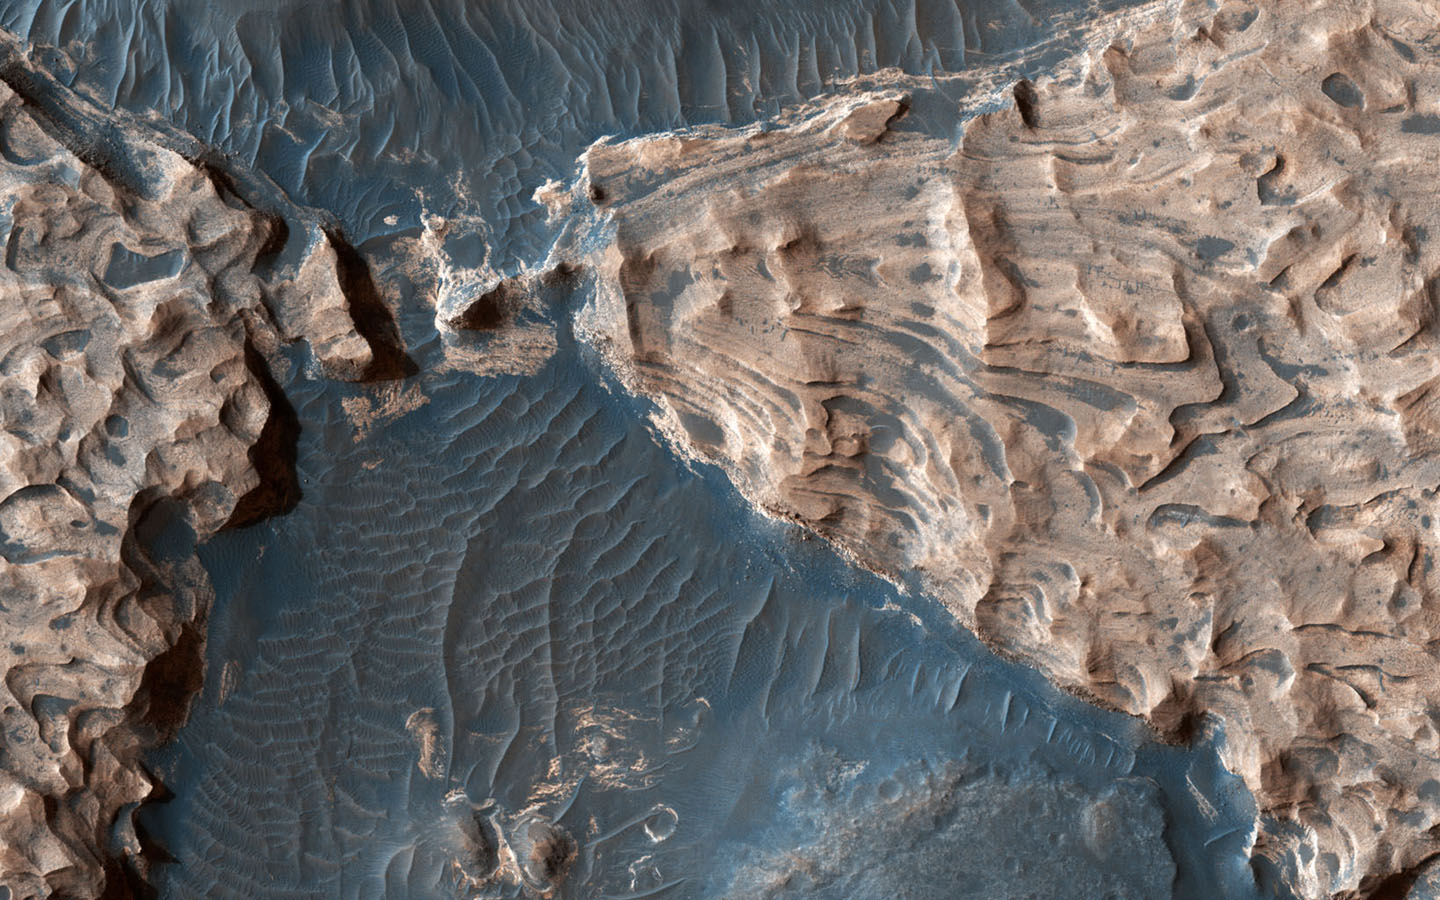 This image from NASA's Mars Reconnaissance Orbiter shows Aram Chaos, a 280-kilometer-wide impact crater in the Southern Highlands. Uplifted blocks of hematite and water-altered silicates indicate that this crater once held a lake.